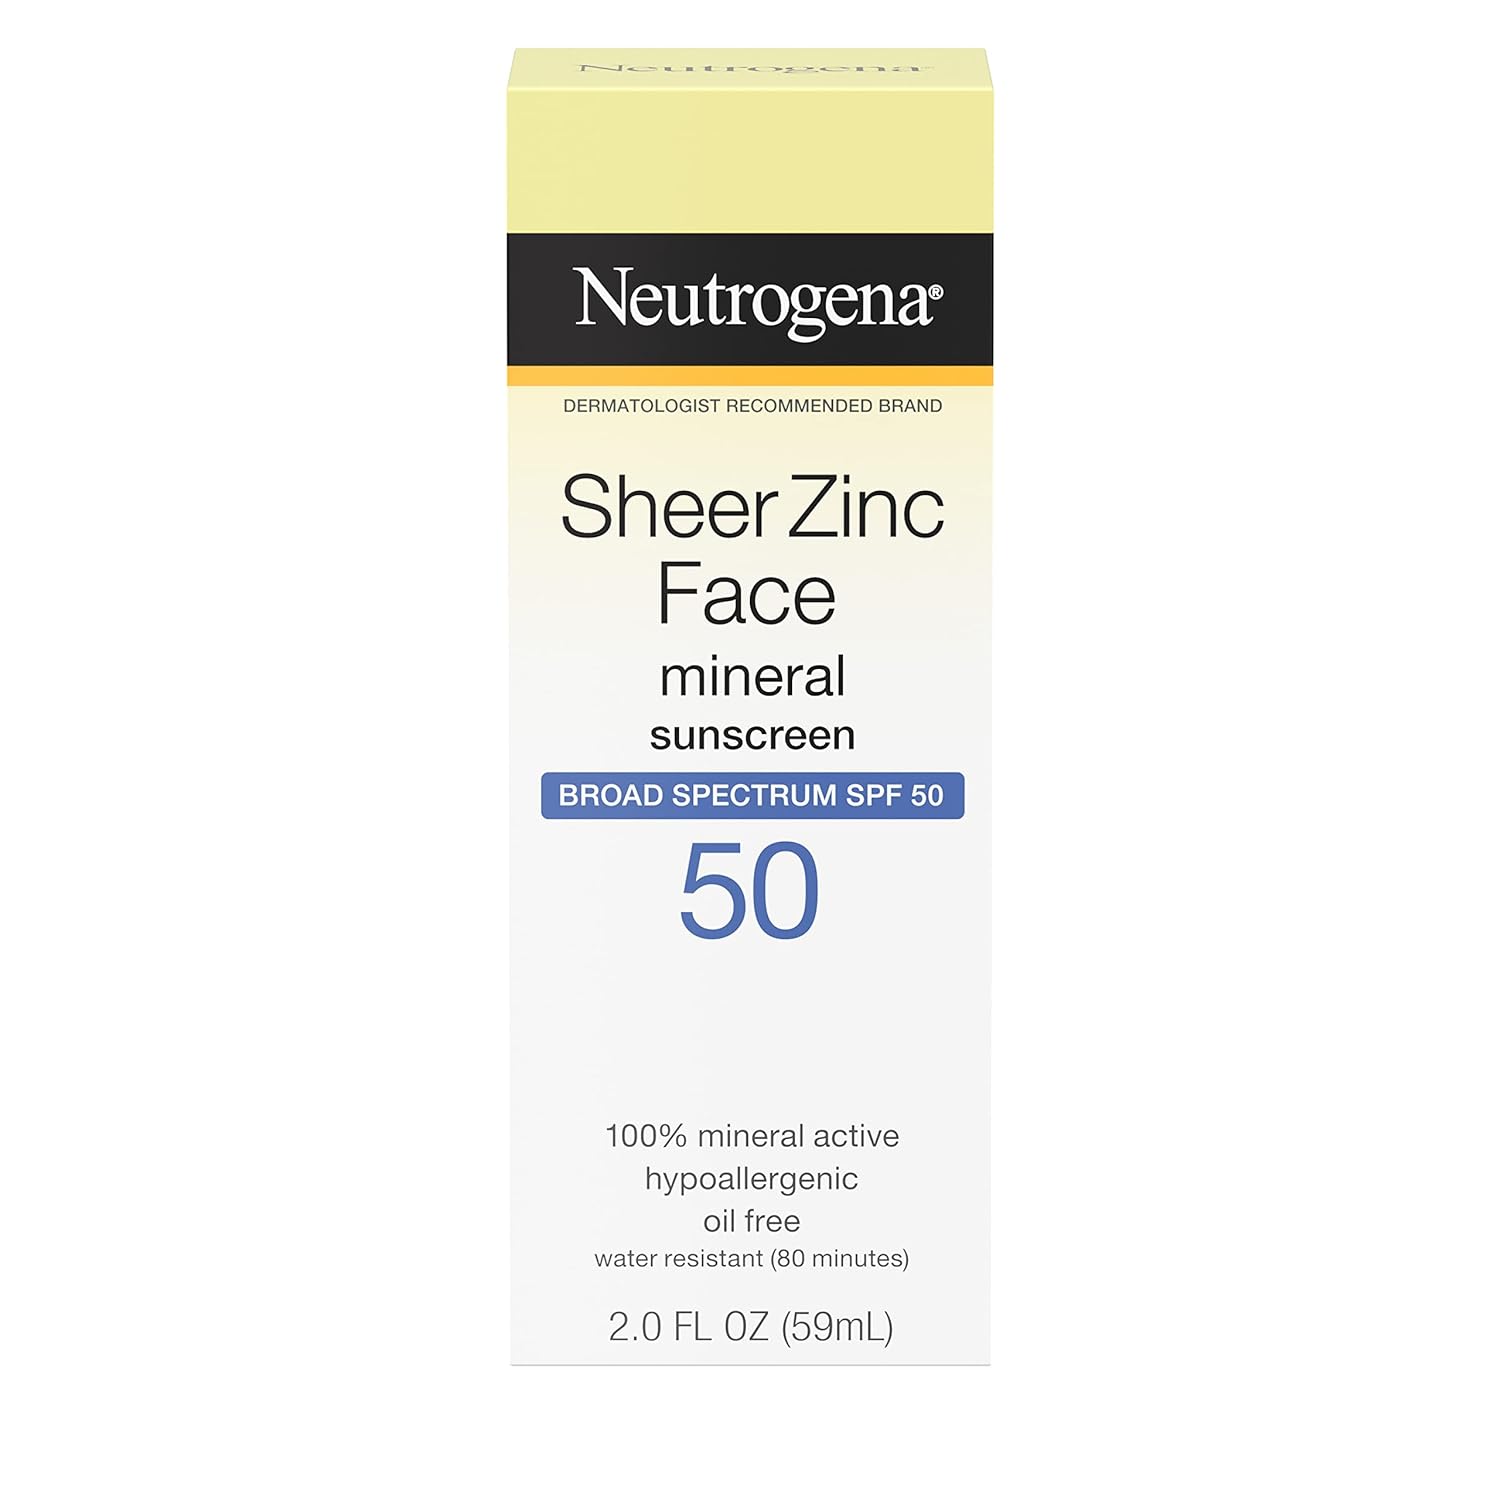 Neutrogena Sheer Zinc Oxide Dry-Touch Face Sunscreen with Broad Spectrum SPF 50, Oil-Free, Non-Comedogenic & Non-Greasy Mineral Sunscreen, 60 ml (2 fl. oz.)